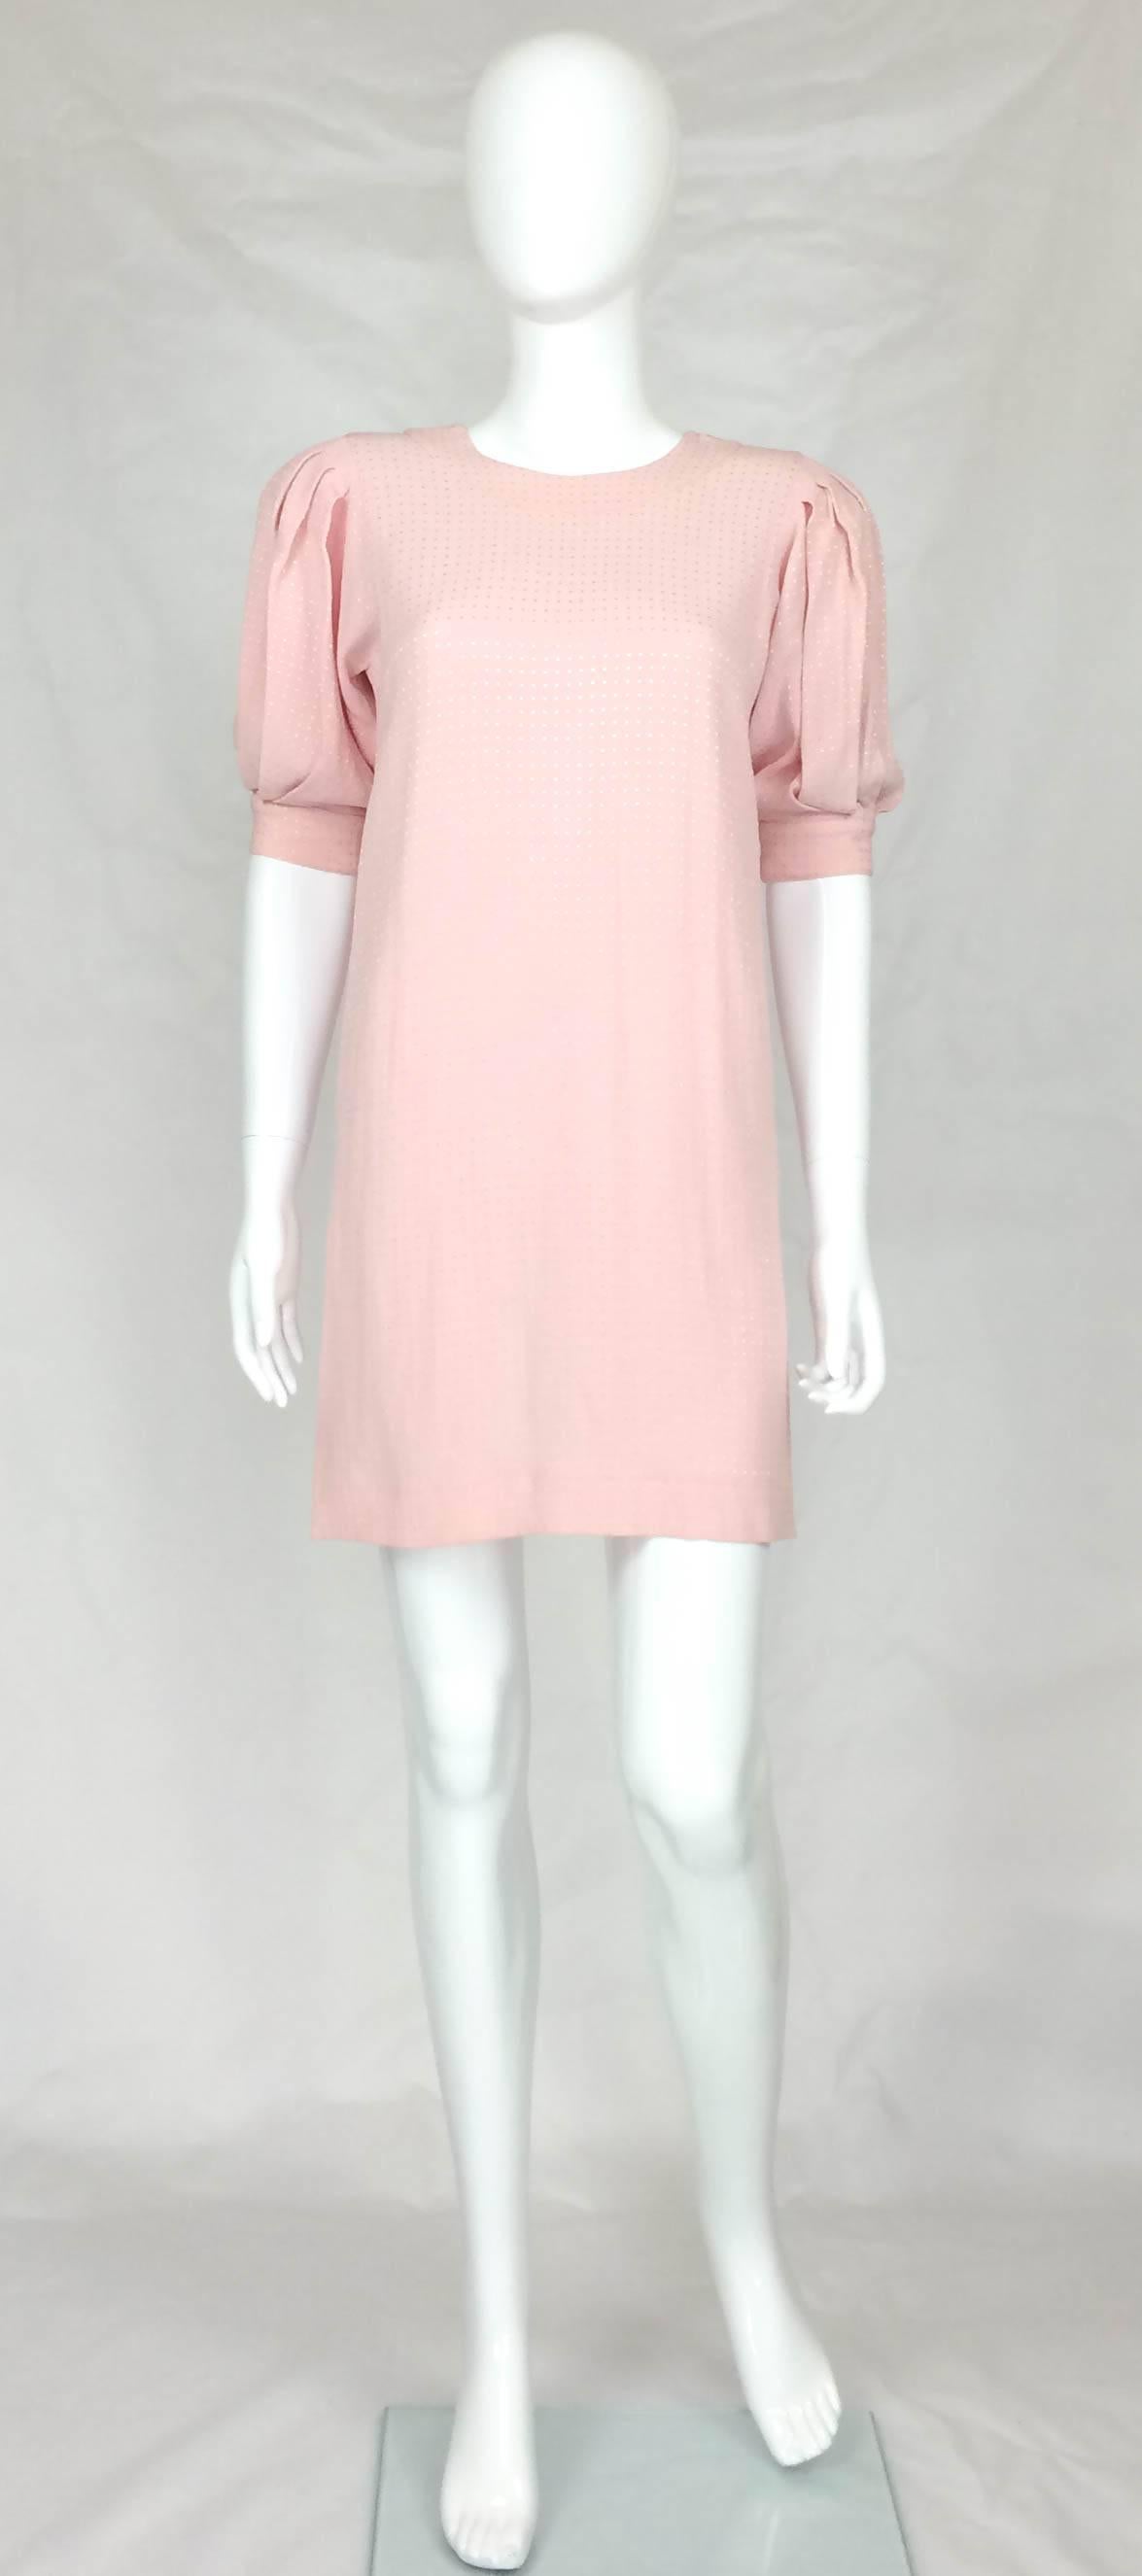 Vintage Jean Muir Mini Dress. This is a very flirty and cute pink dress by one of England’s finest designers. Candy pink colour. The fabric is textured, emulating small embroidered squares. It features a jewel neckline (crew neck) and elbow length